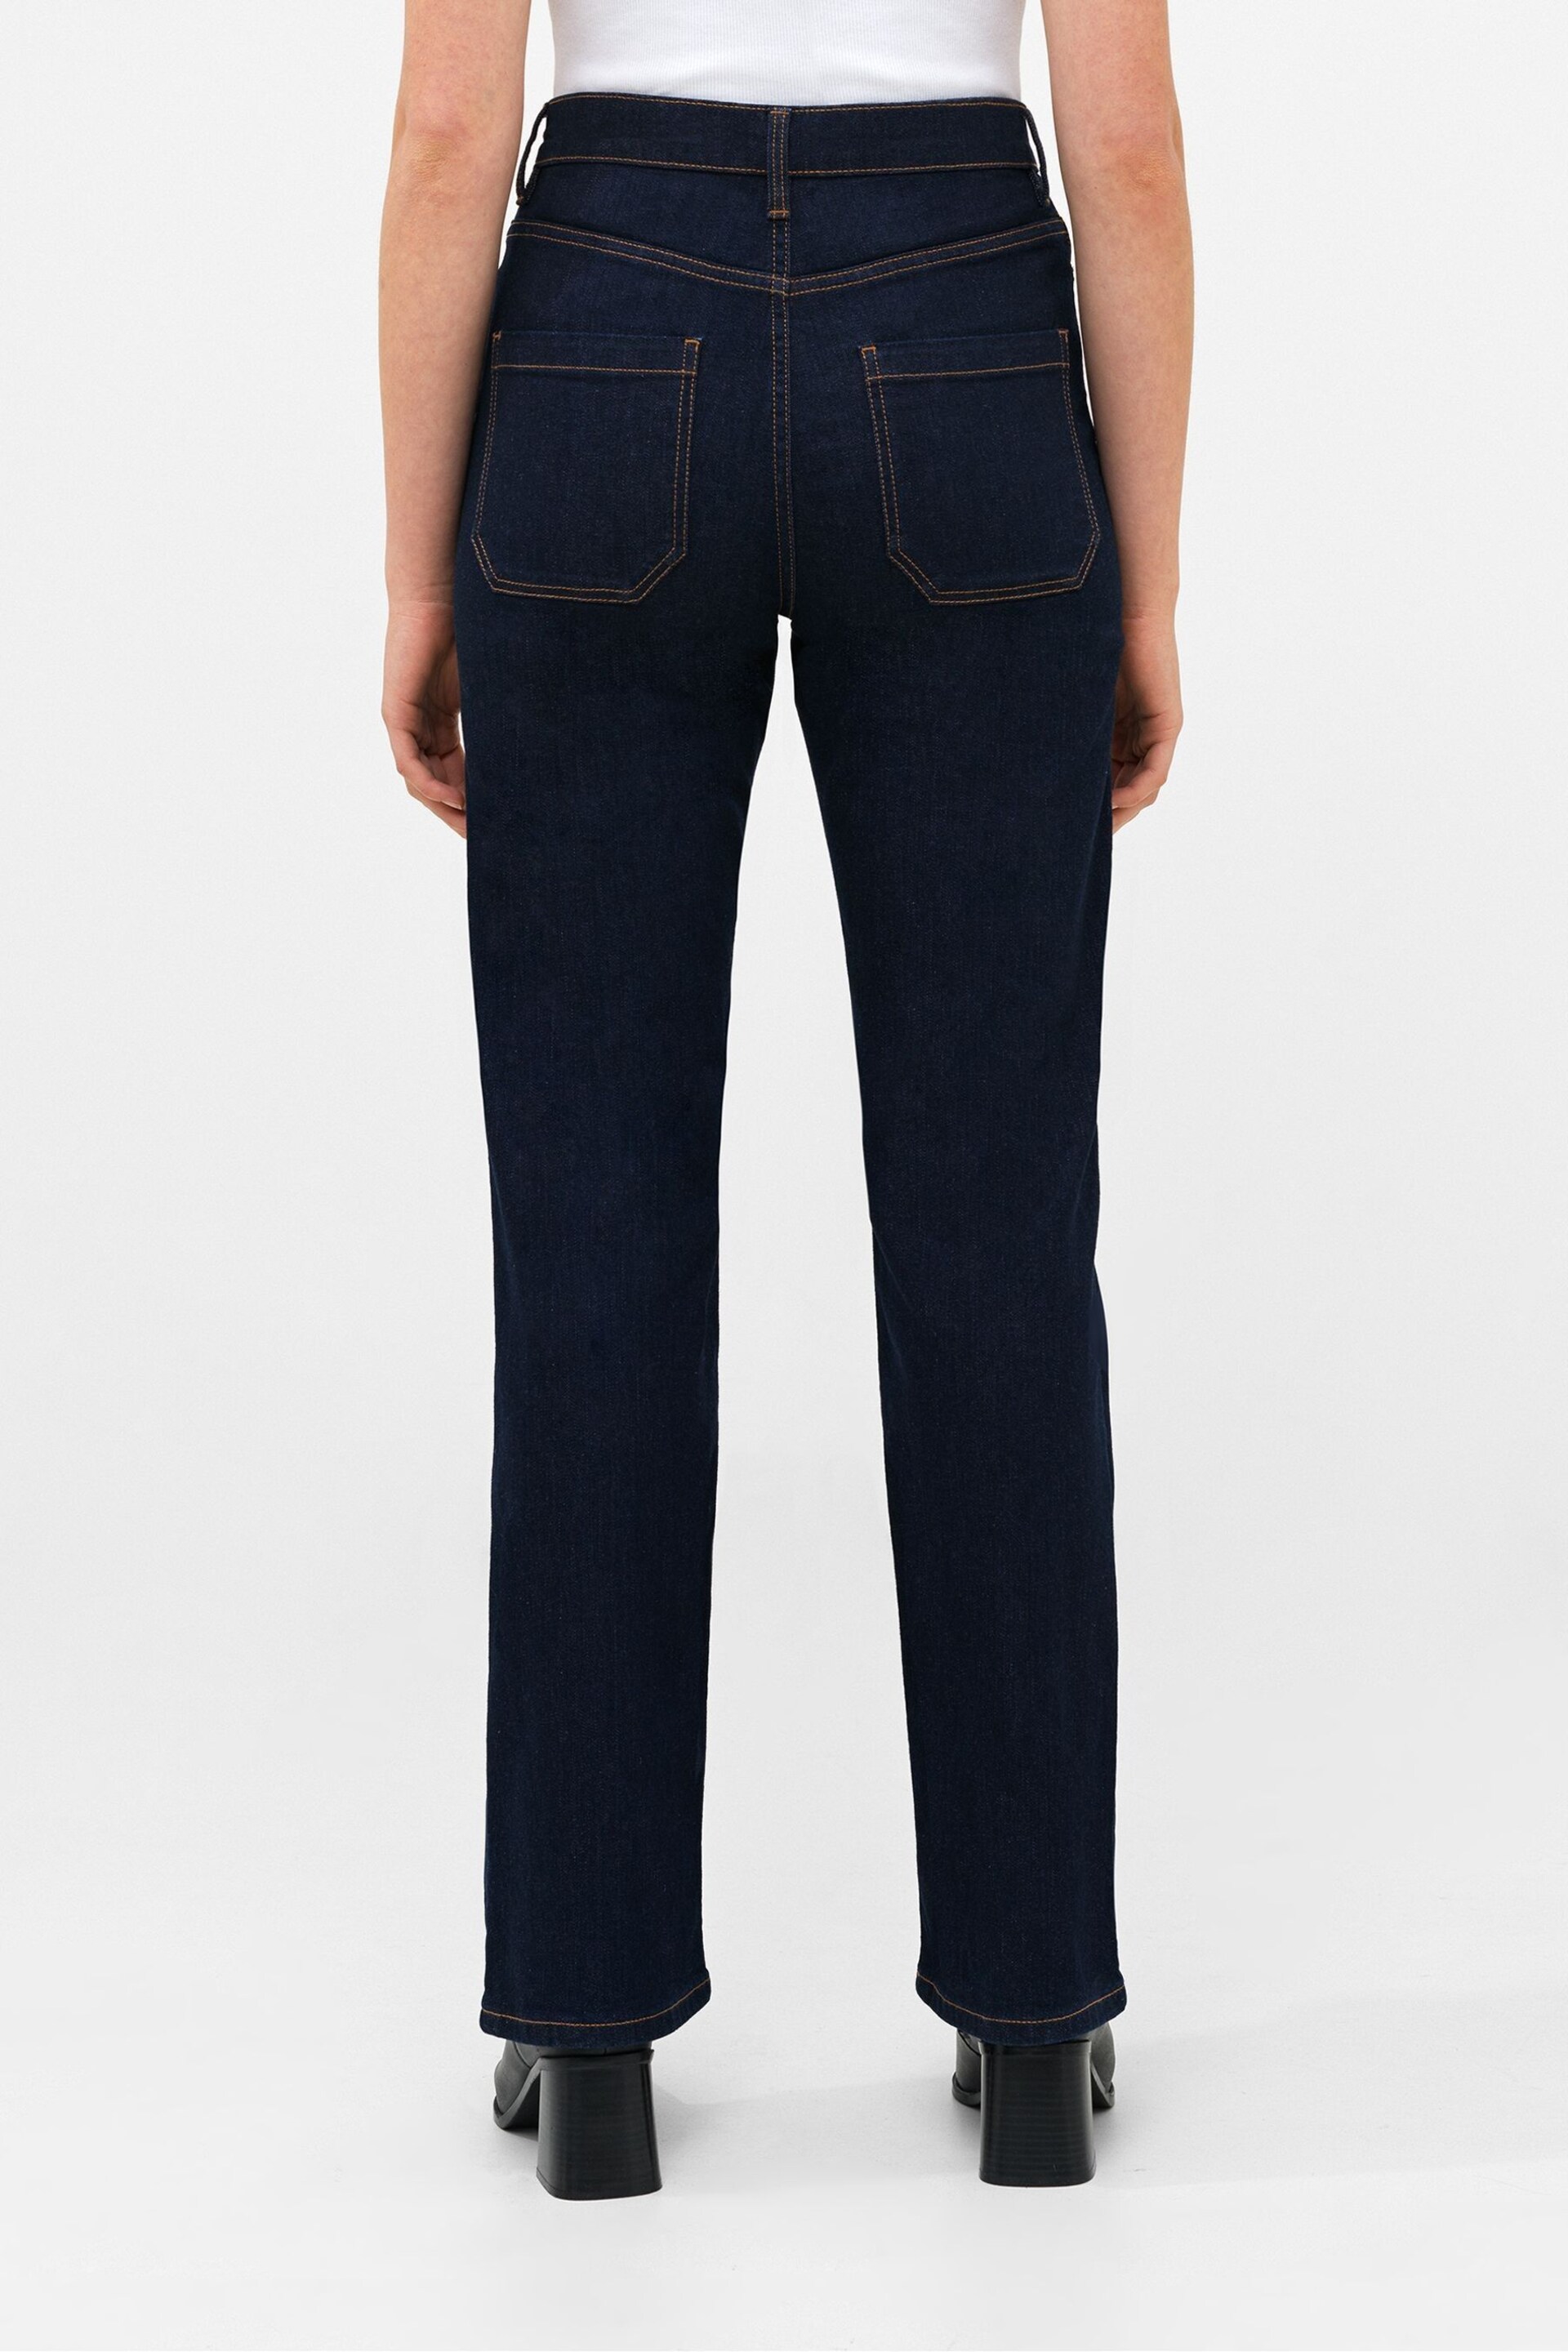 French Connection Stretch Wide Flare Denim Trousers - Image 2 of 4